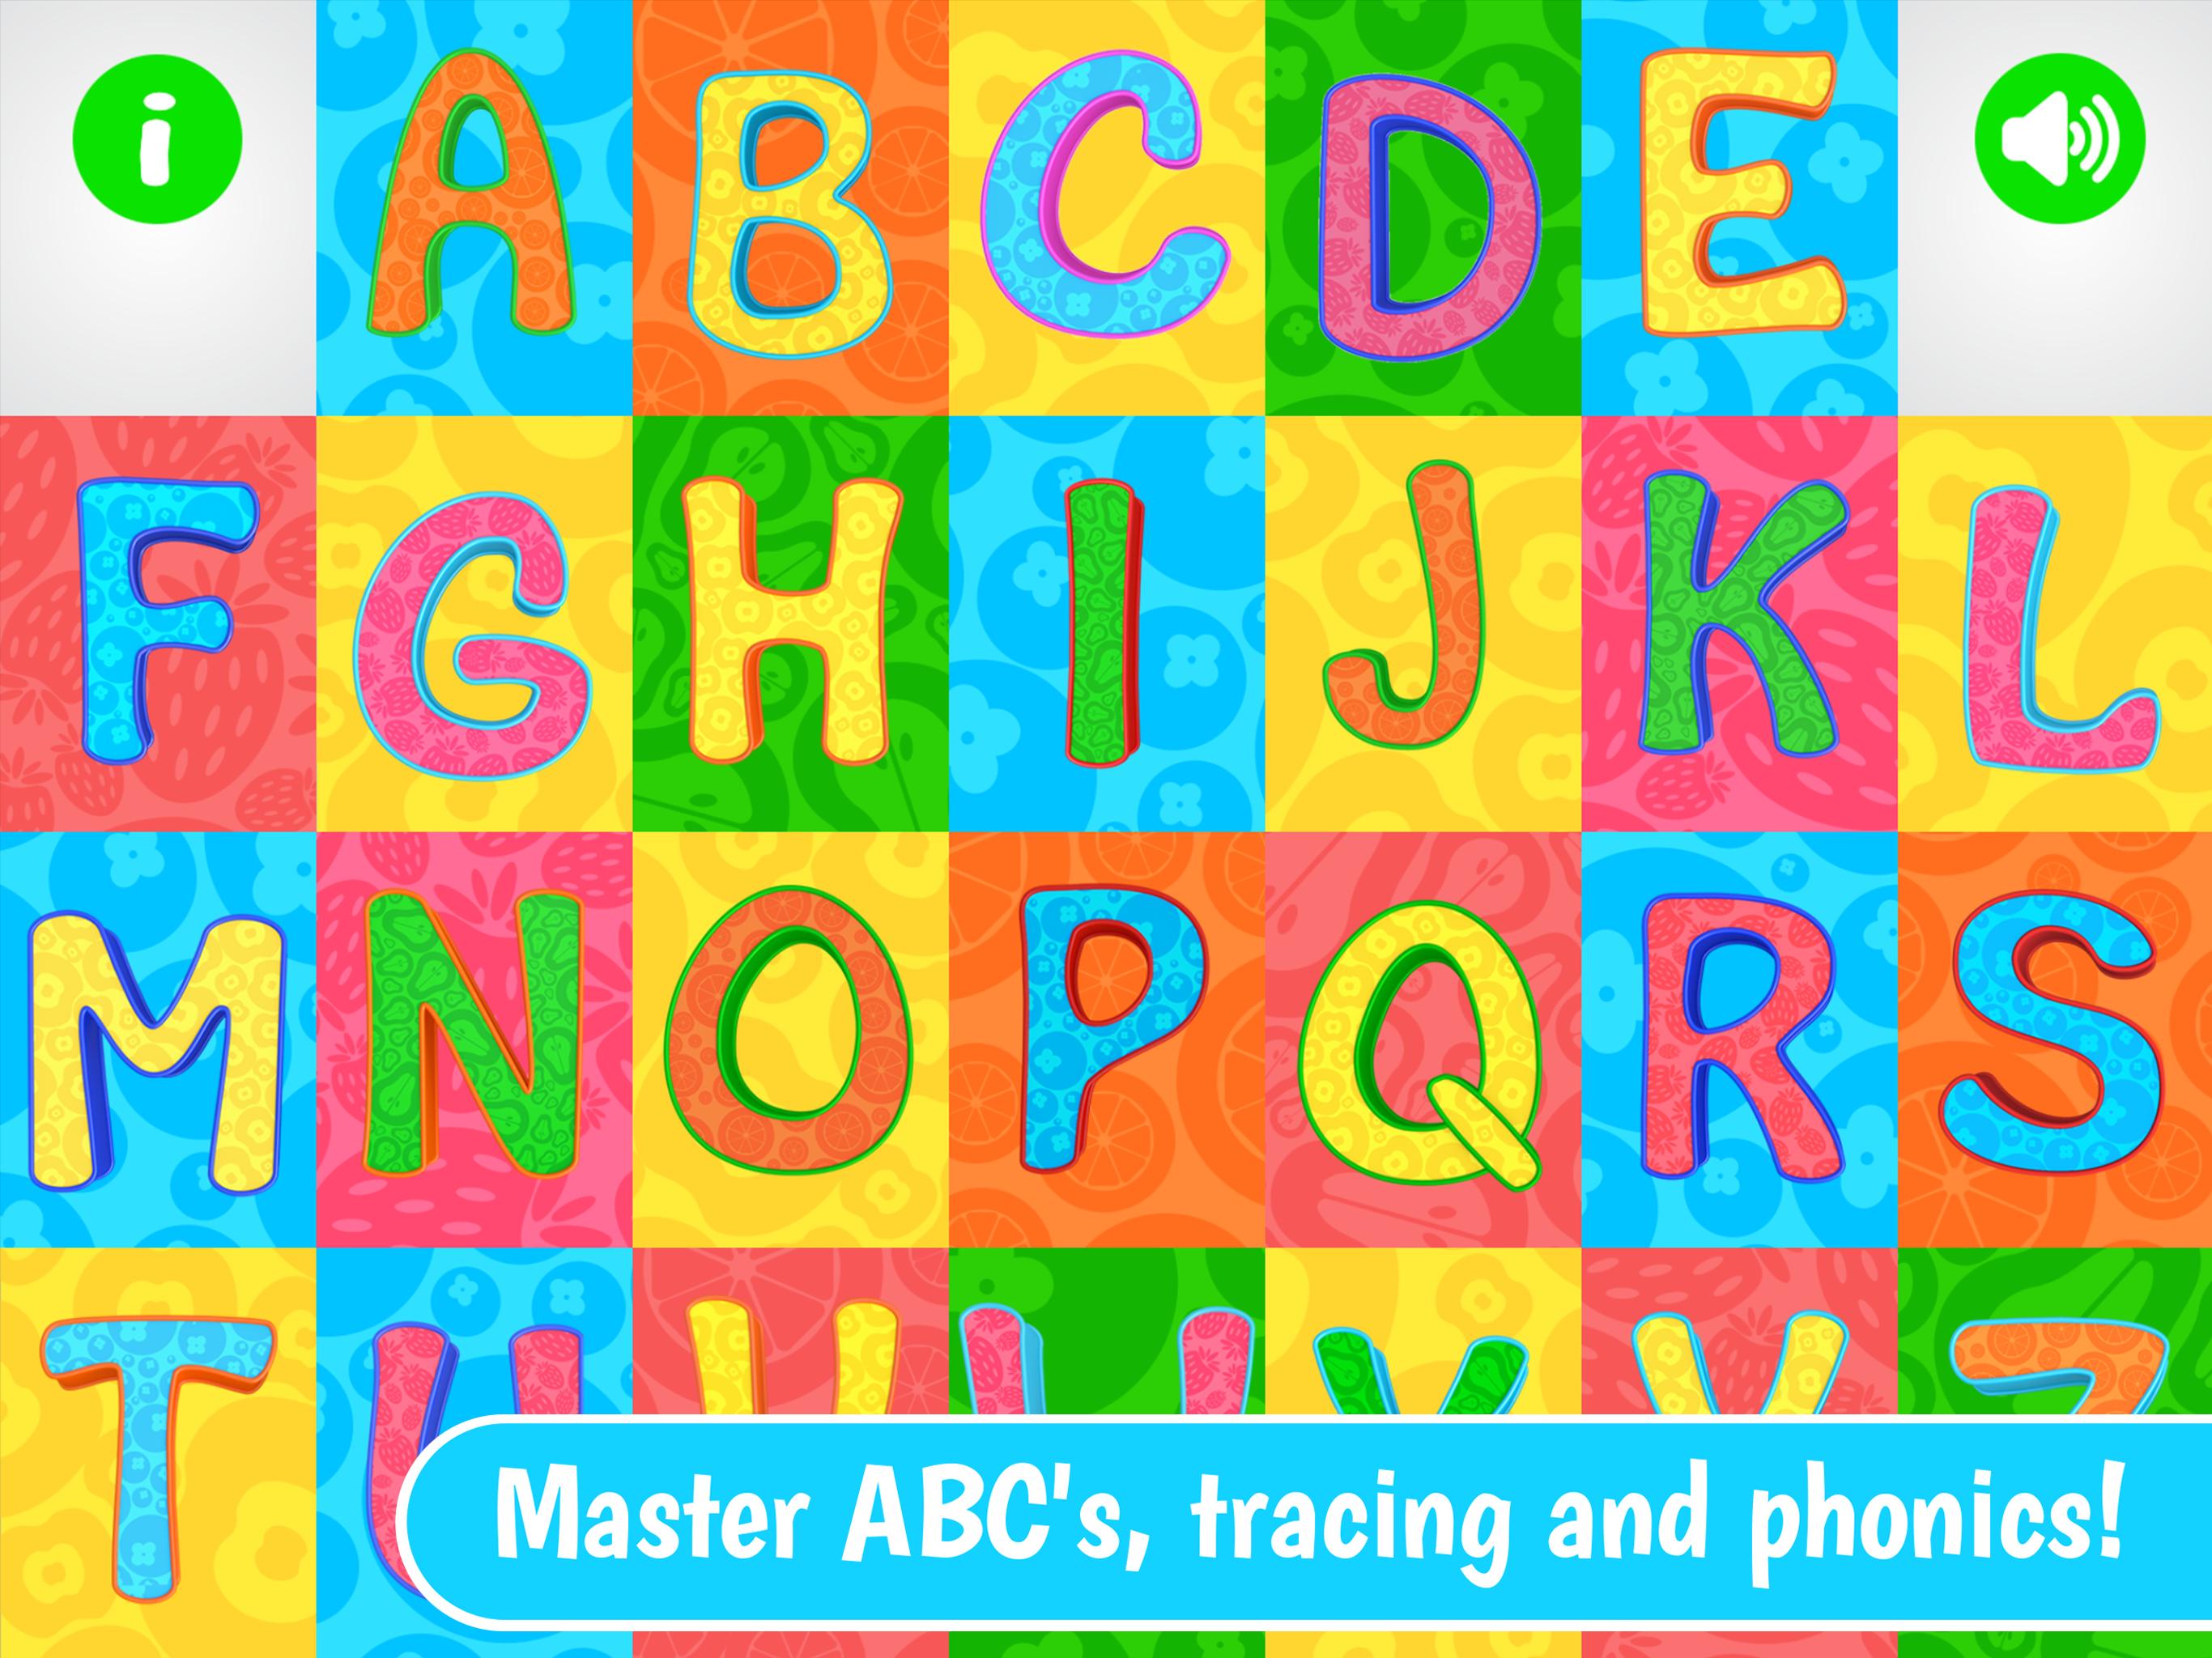 ABC – Phonics and Tracing from Dave and Ava 1.0.39 Screenshot 11